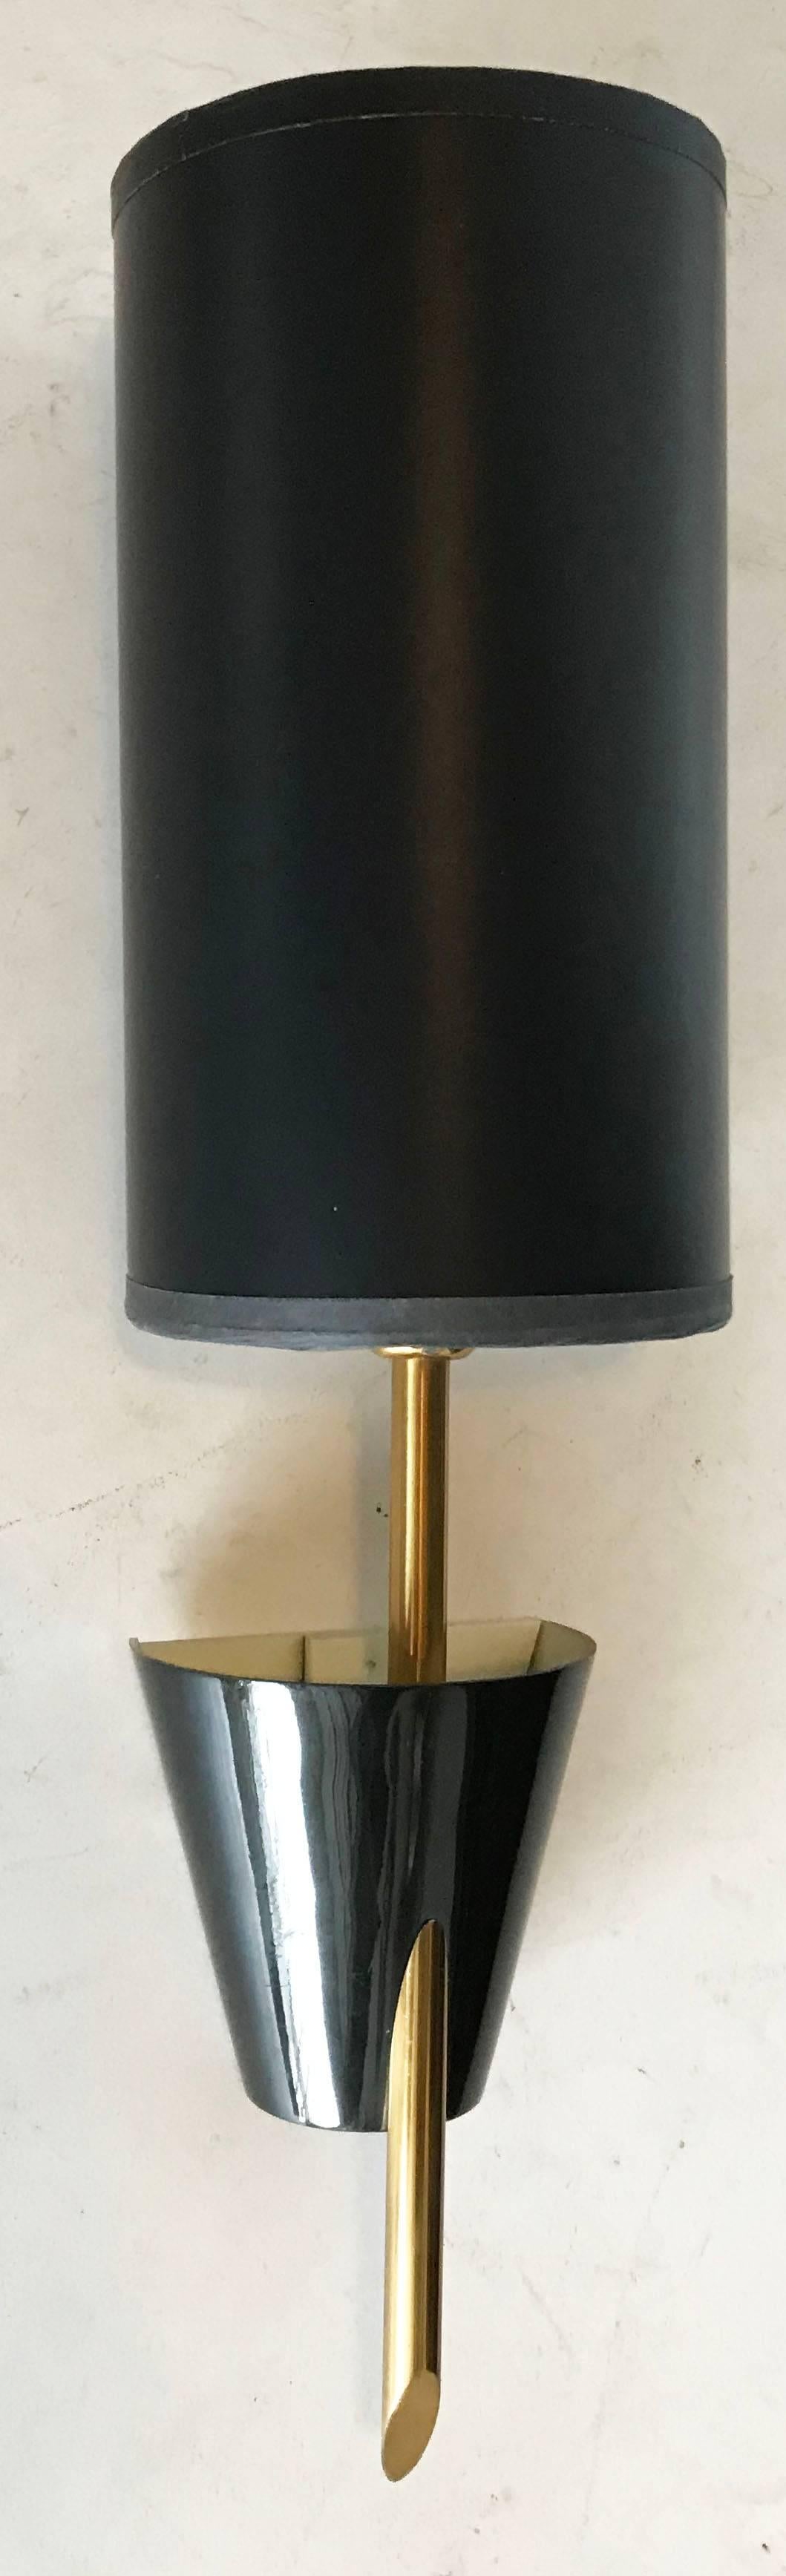 Hand-Crafted Pair, Maison Lunel Brass & Gunmetal Sconce Wall Lights France Mid-Century Modern